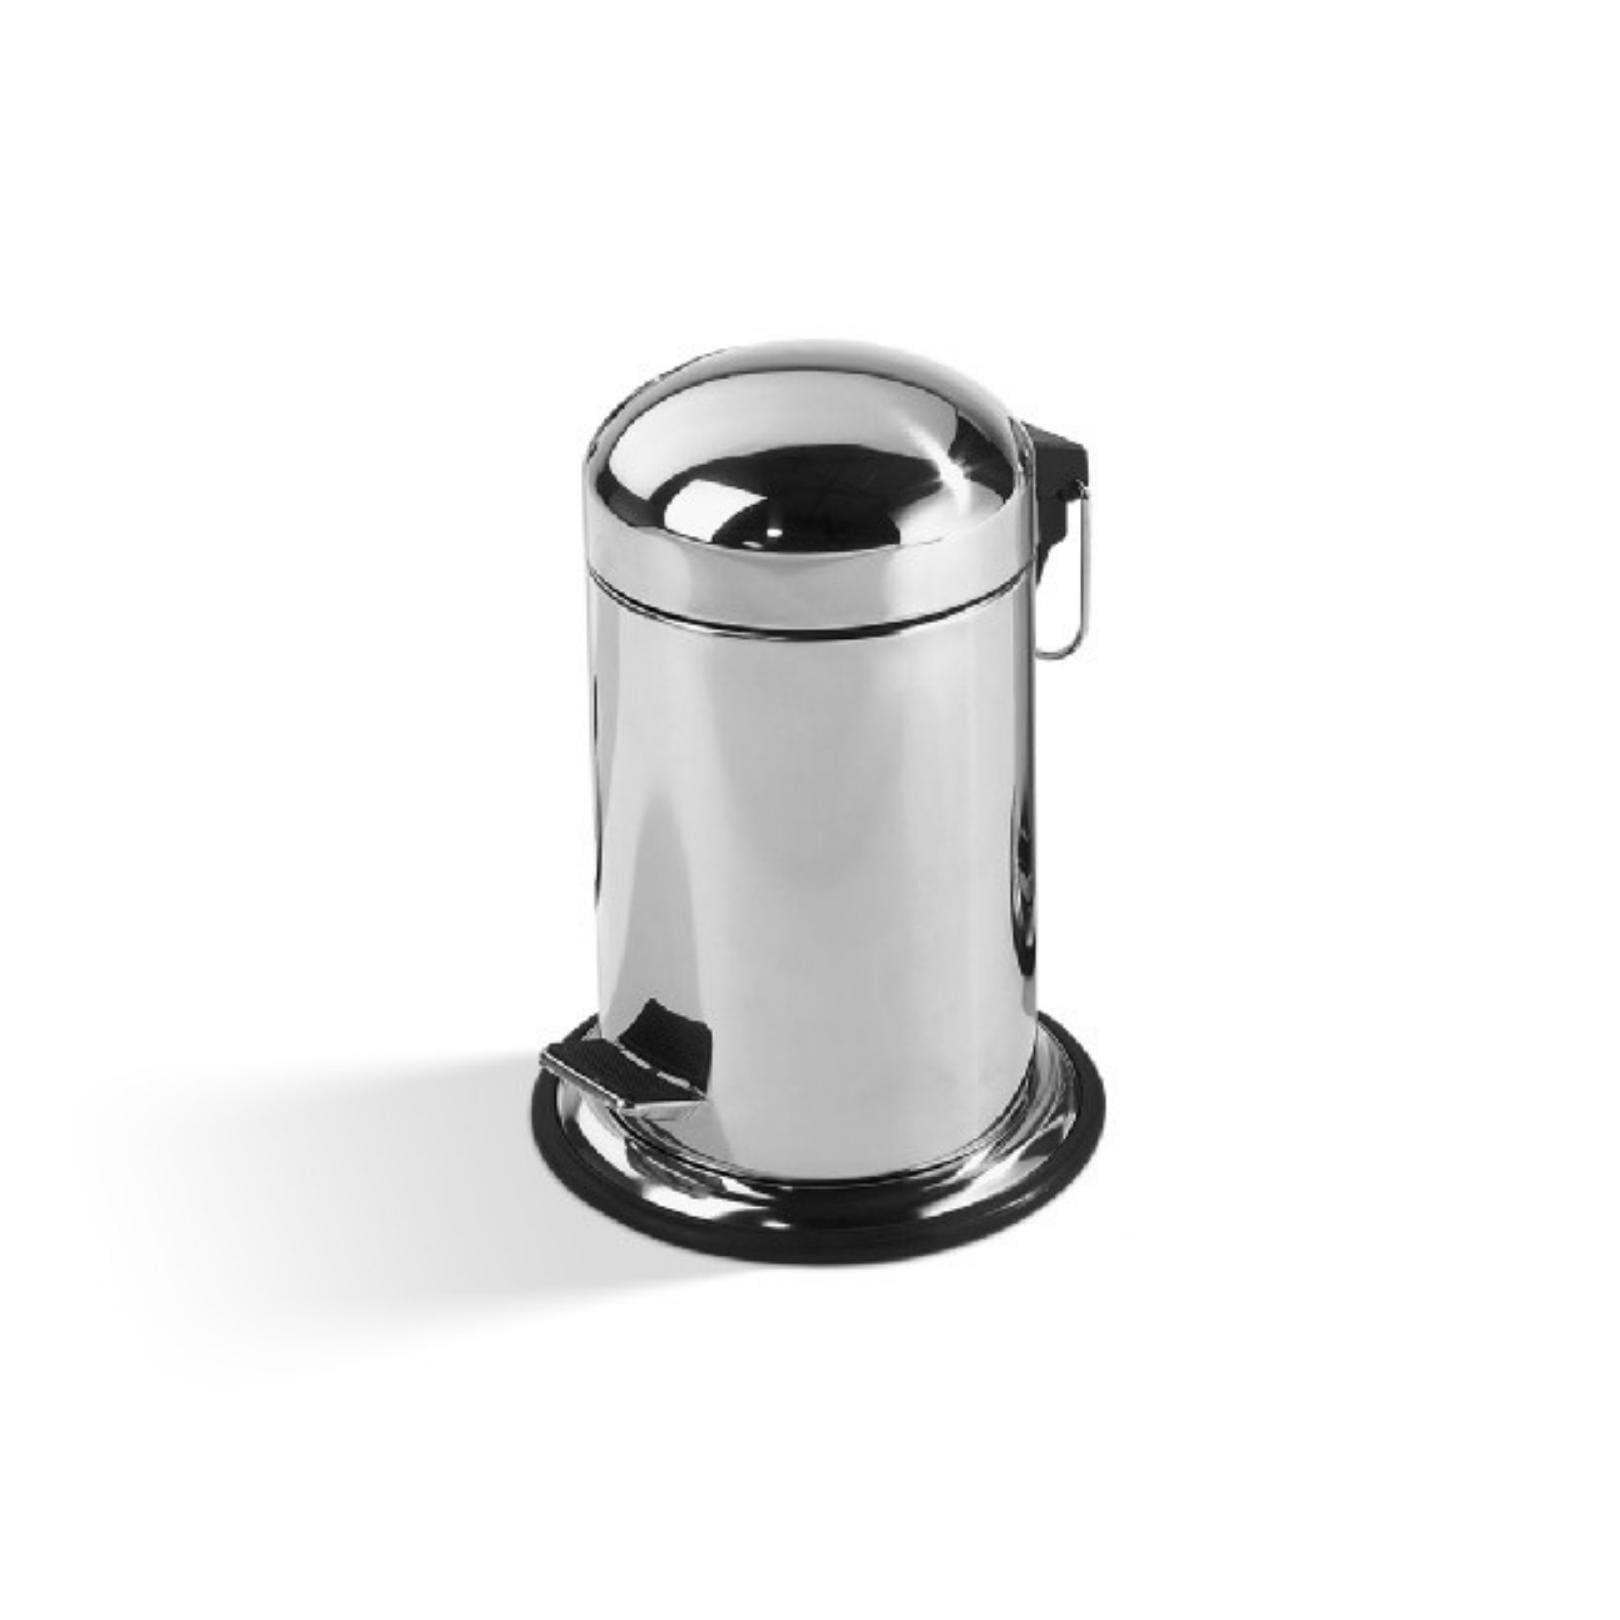 Pedal bin Stainless steel polished Te 30 Decor Walther